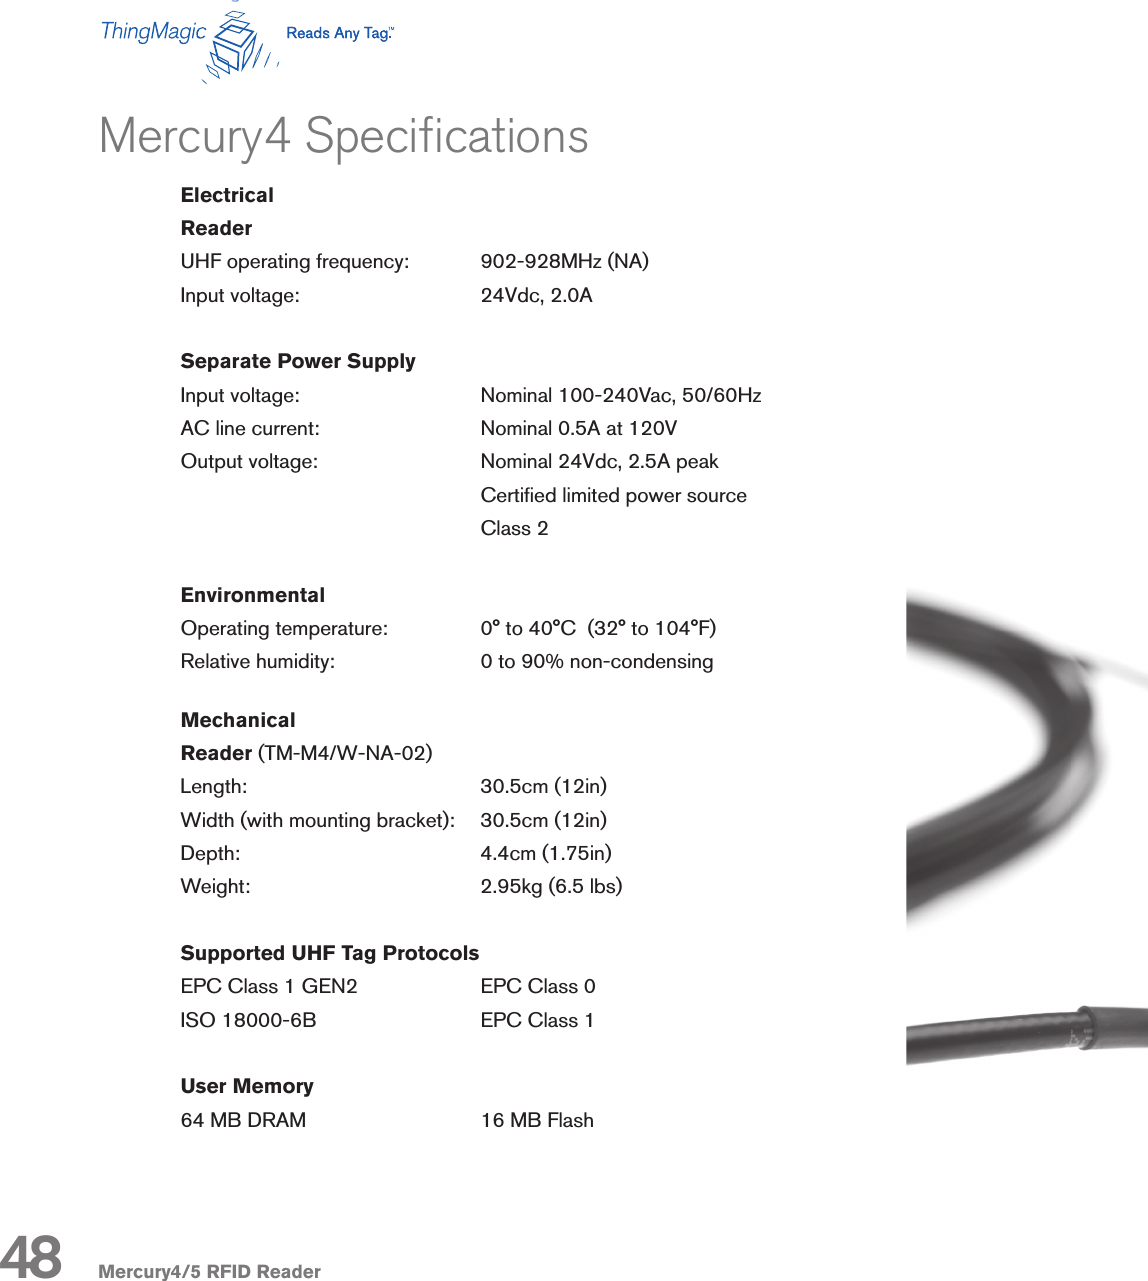 Mercury4/5 RFID ReaderMercury4 SpecicationsElectricalReaderUHF operating frequency:   902-928MHz (NA)Input voltage:                   24Vdc, 2.0ASeparate Power SupplyInput voltage:      Nominal 100-240Vac, 50/60HzAC line current:      Nominal 0.5A at 120VOutput voltage:      Nominal 24Vdc, 2.5A peak        Certied limited power source        Class 2EnvironmentalOperating temperature:    0° to 40°C  (32° to 104°F)Relative humidity:    0 to 90% non-condensingMechanicalReader (TM-M4/W-NA-02)Length:       30.5cm (12in)Width (with mounting bracket):    30.5cm (12in)Depth:        4.4cm (1.75in)Weight:       2.95kg (6.5 lbs)Supported UHF Tag ProtocolsEPC Class 1 GEN2    EPC Class 0ISO 18000-6B      EPC Class 1User Memory64 MB DRAM      16 MB Flash48